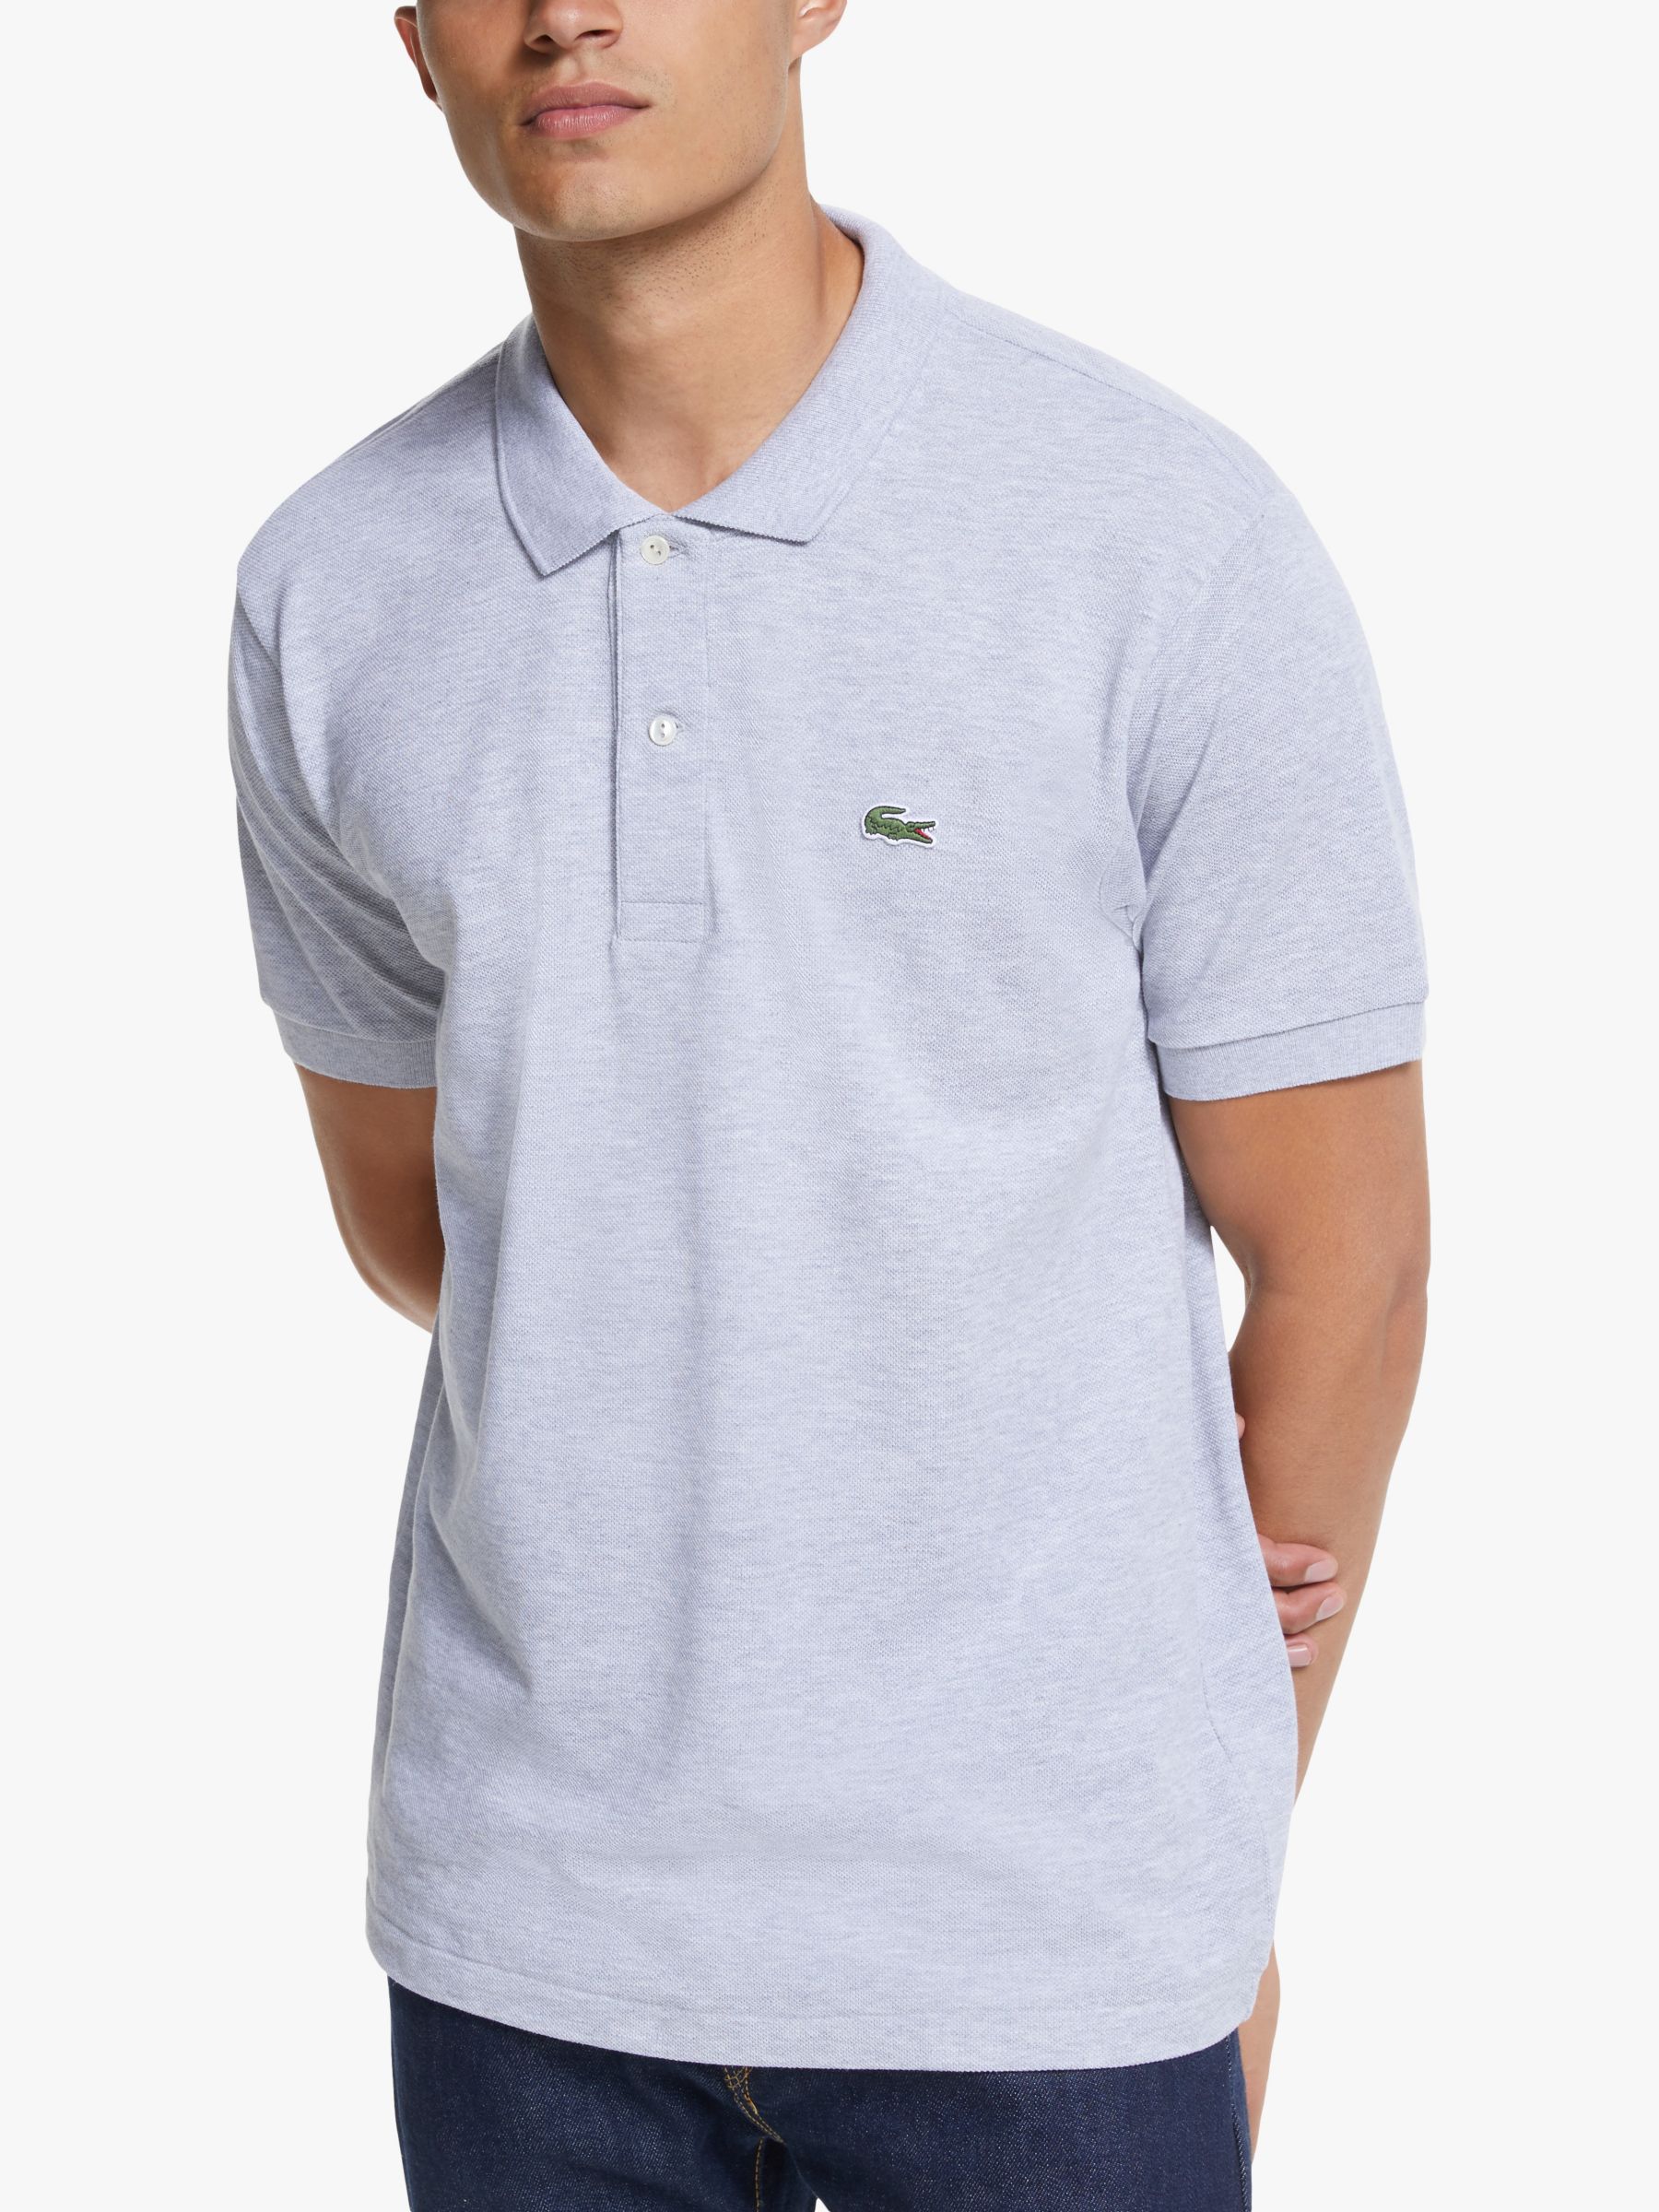 Outlaw fællesskab bjærgning Lacoste Classic Fit Logo Polo Shirt, Silver Chine at John Lewis & Partners